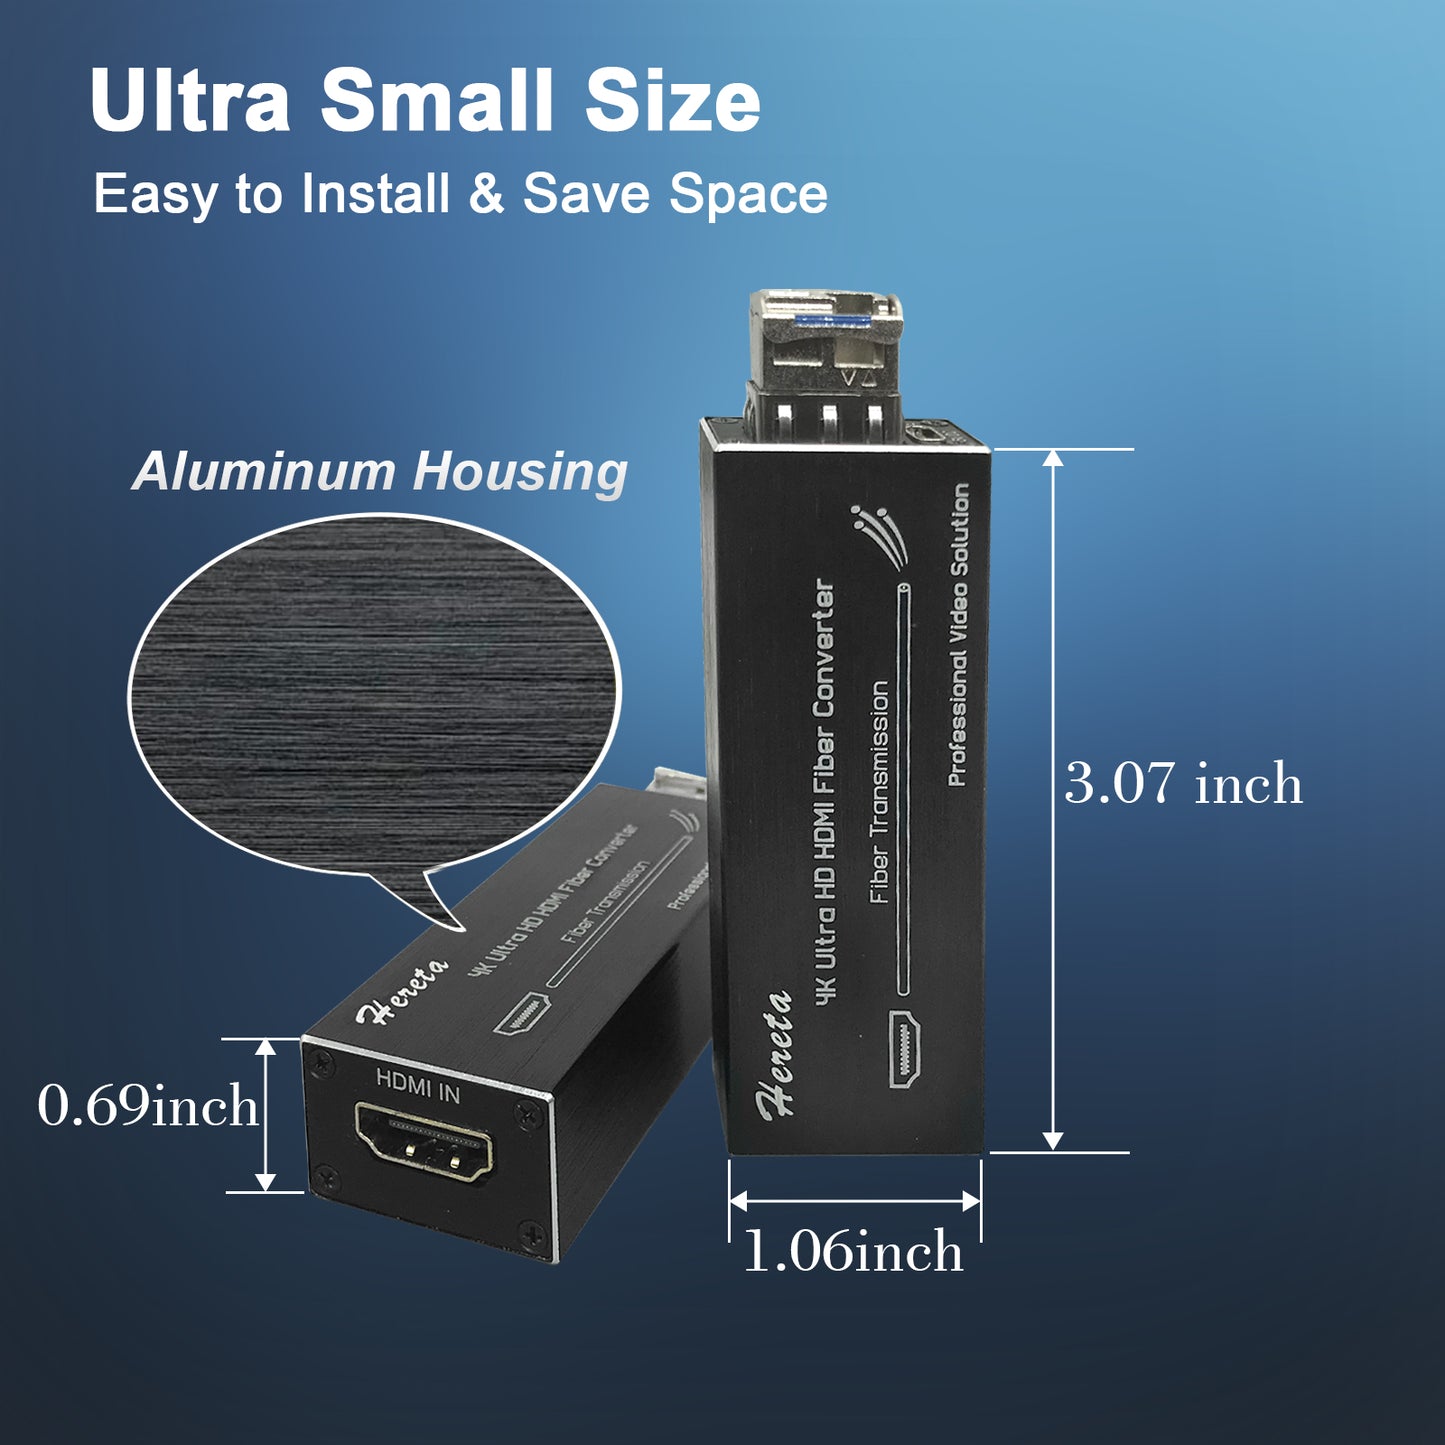 4K HDMI Fiber Extender with SFP Module (LC Port) 20KM Mini Fiber Optical Transceiver Over Single Mode Optical Fiber Uncompressed No losses No Latency Transmitting Video Data rate up to 10.3Gbps